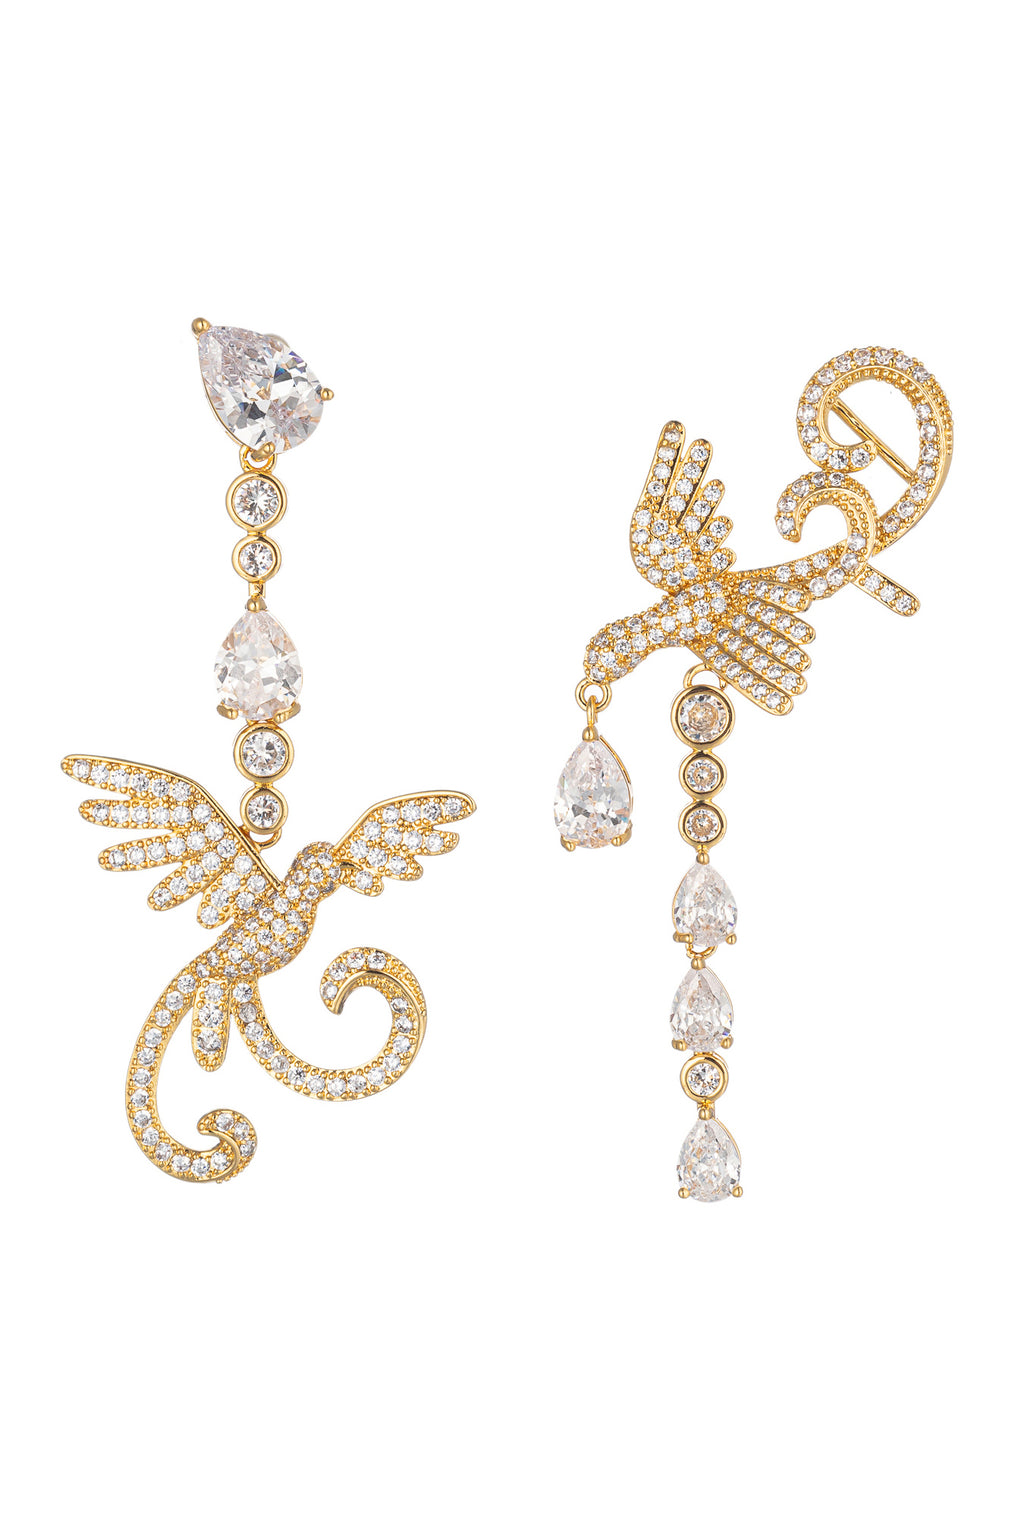 Gold tone brass bird pendant dangle earrings studded with CZ crystals.